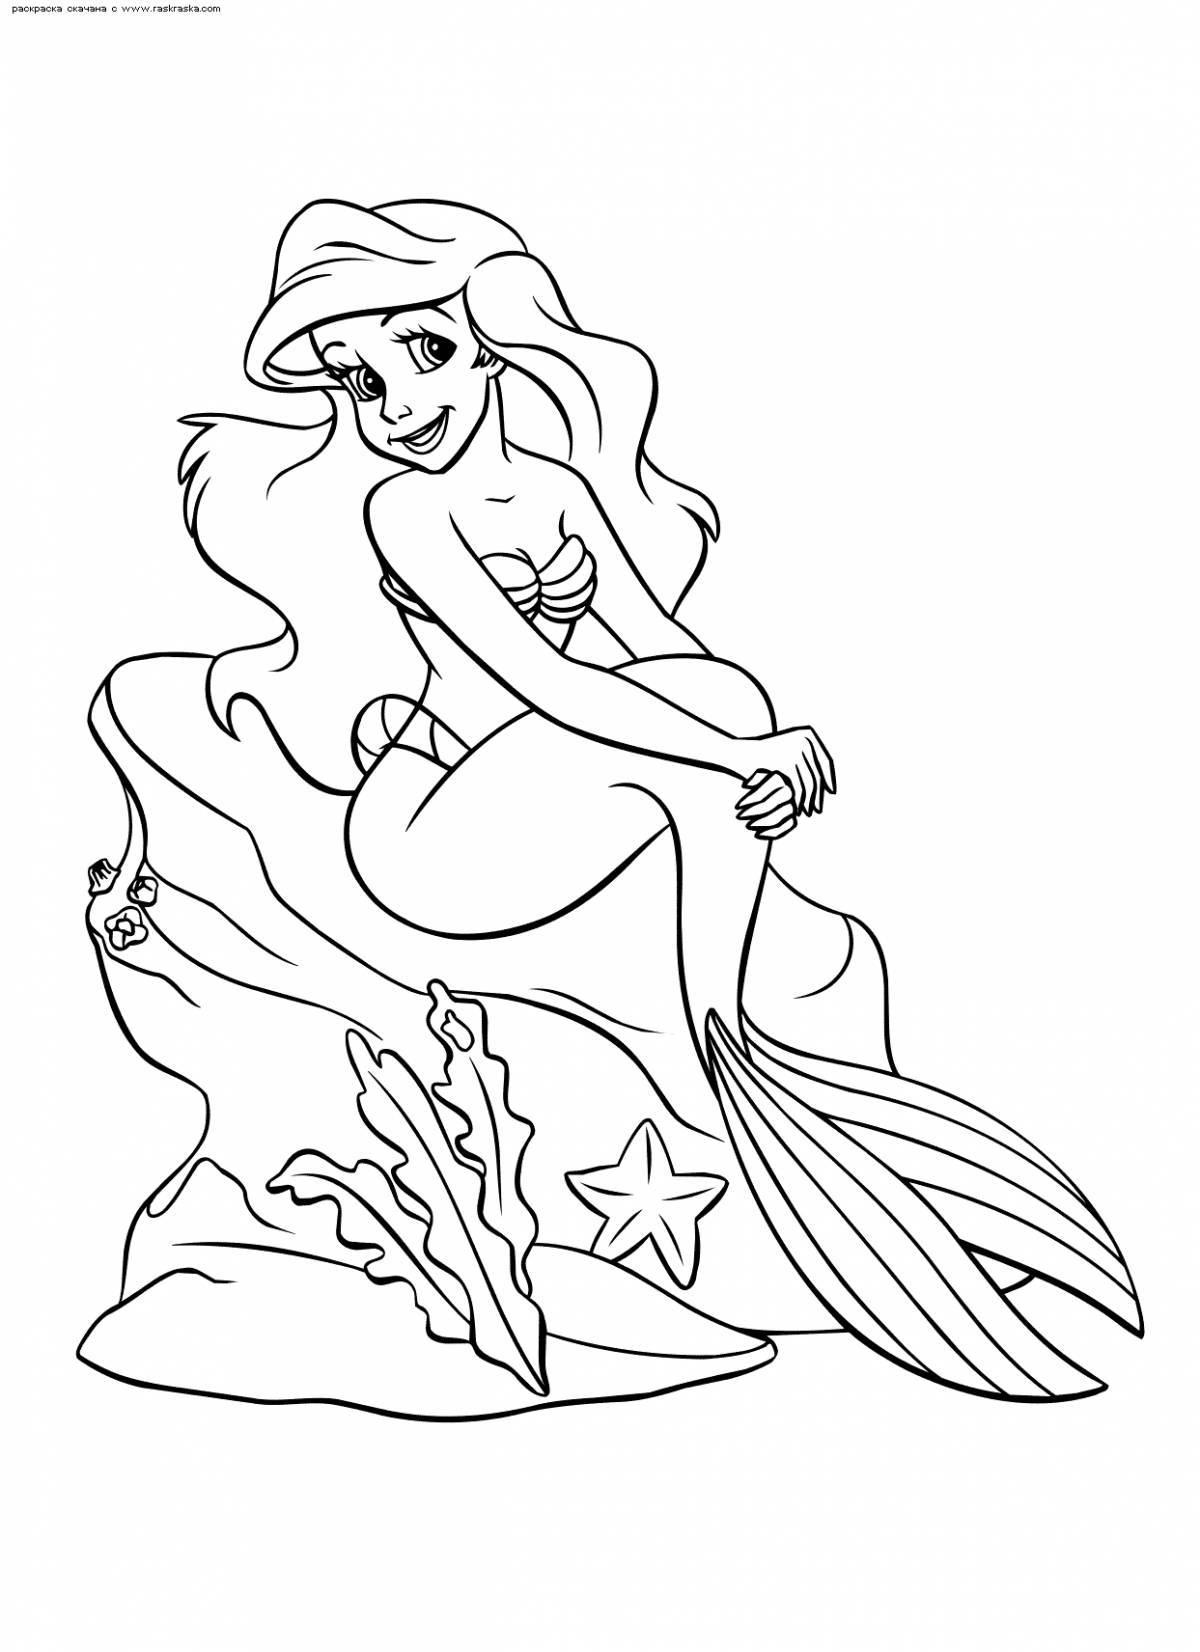 Radiant little mermaid coloring book for kids